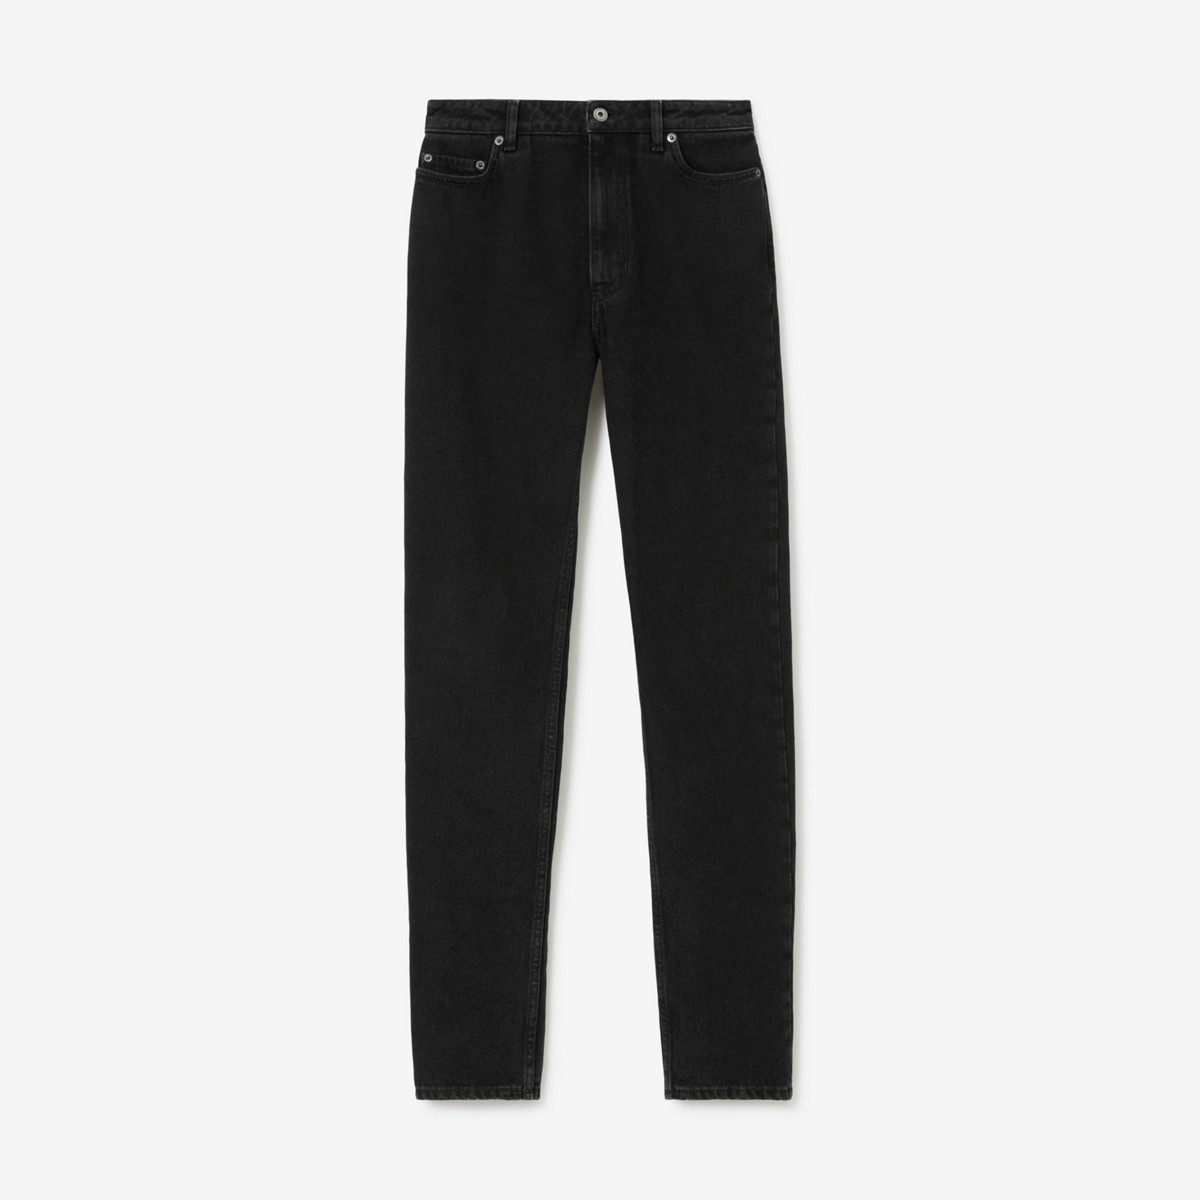 Burberry Slim Fit Jeans In Charcoal